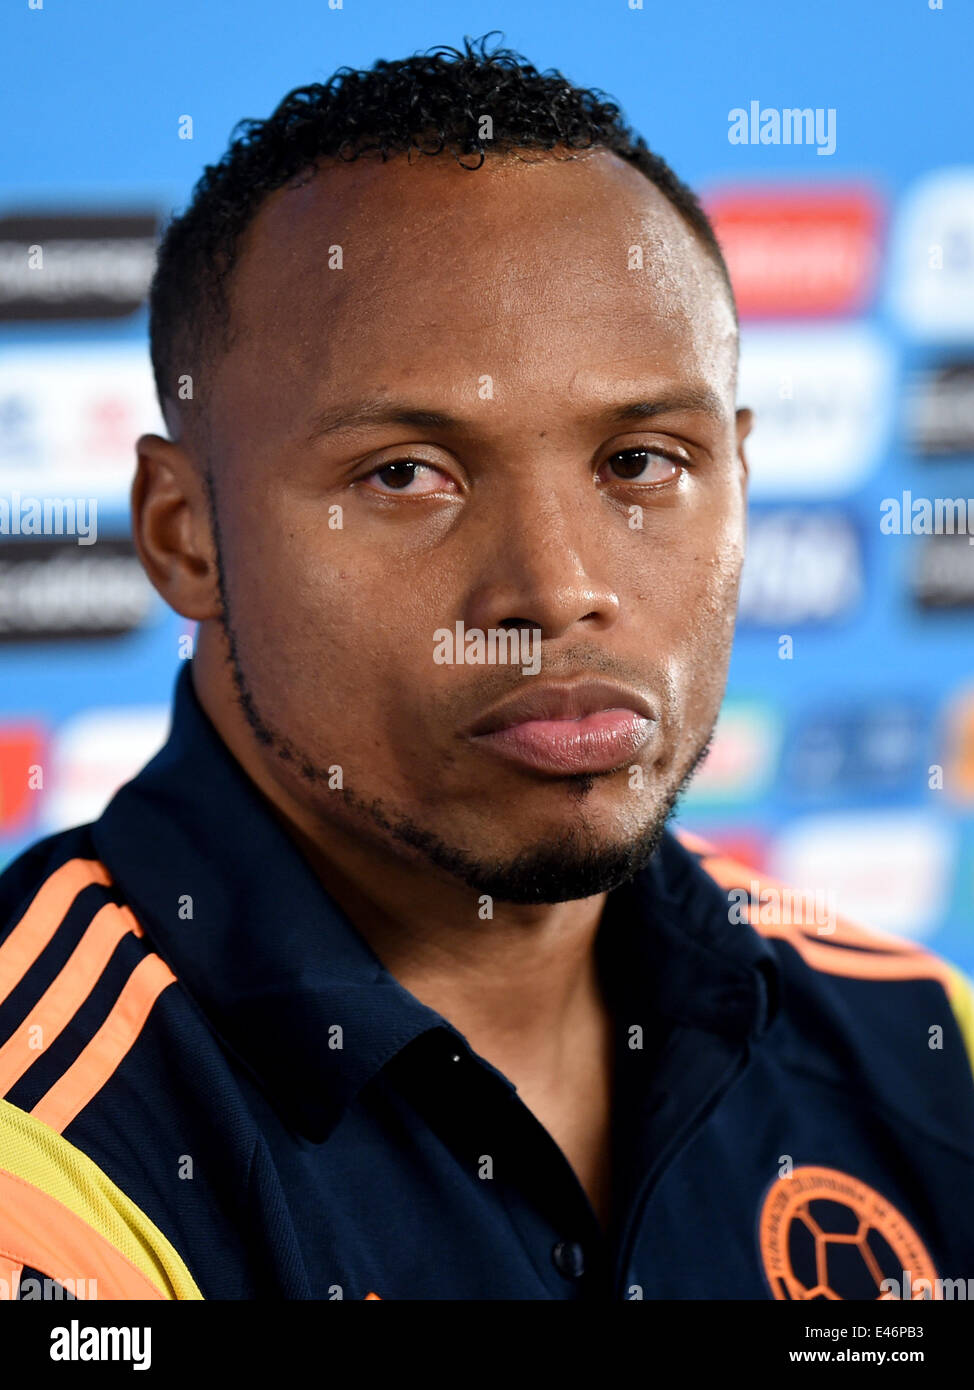 Fortaleza, Brazil. 3rd July, 2014. Colombia's Juan Camilo Zuniga is seen during a press conference before the quaterfinal World Cup soccer match between Brazil and Colombia in Fortaleza, Brazil, 3 July 2014. Photo: Marius Becker/dpa/Alamy Live News Stock Photo